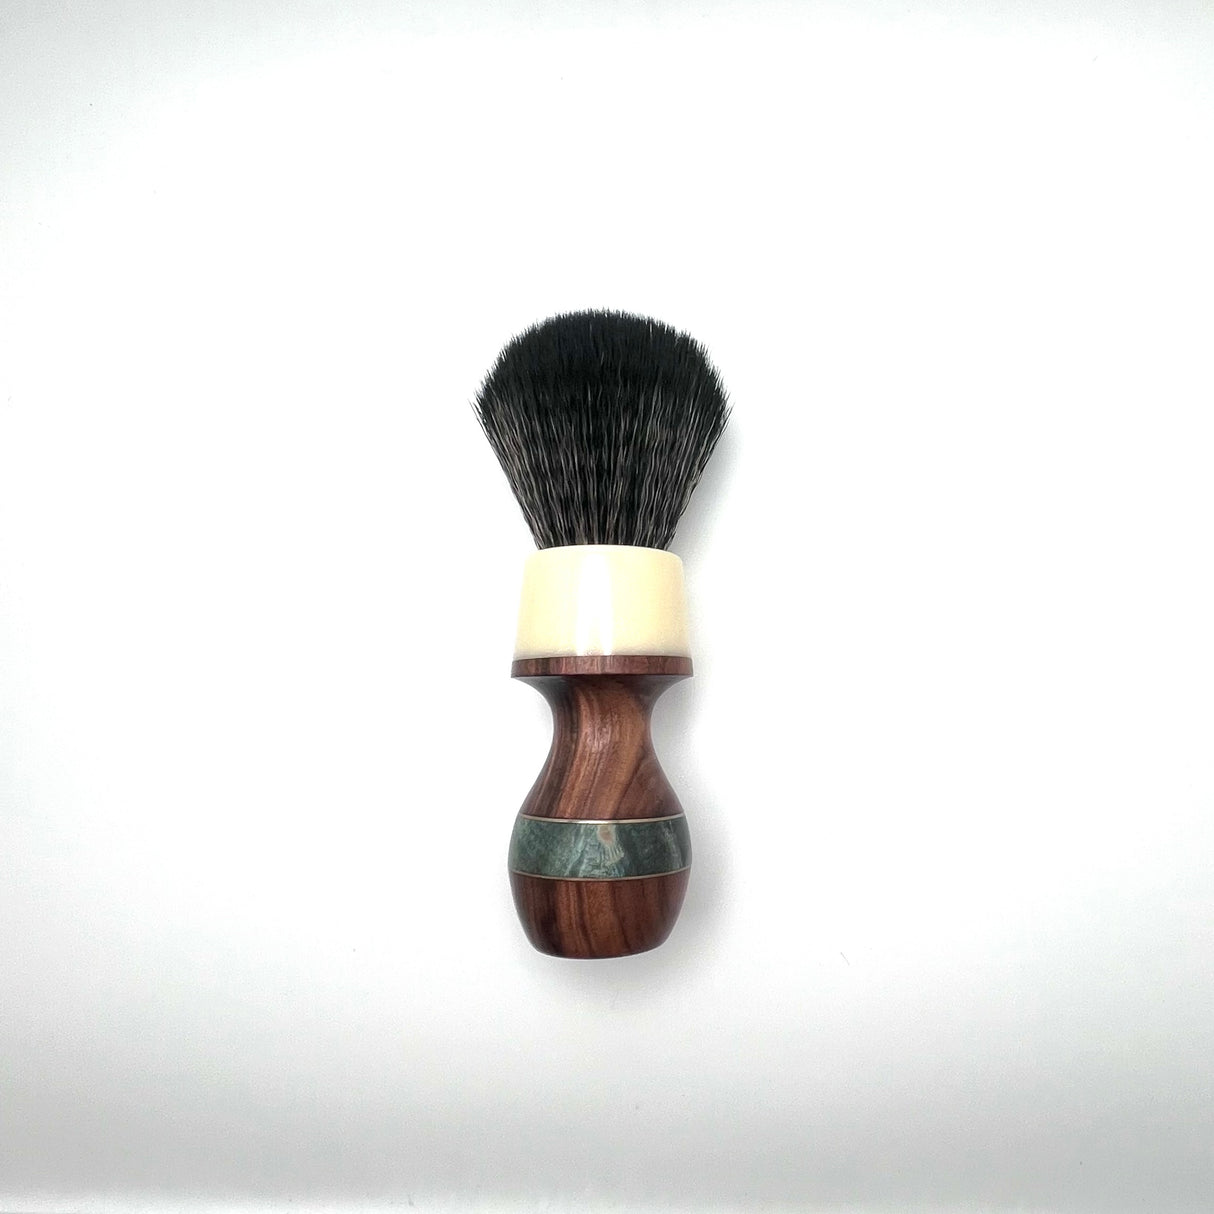 Pre-Owned - That Darn Rob - Custom Synthetic Shave Brush 26mm